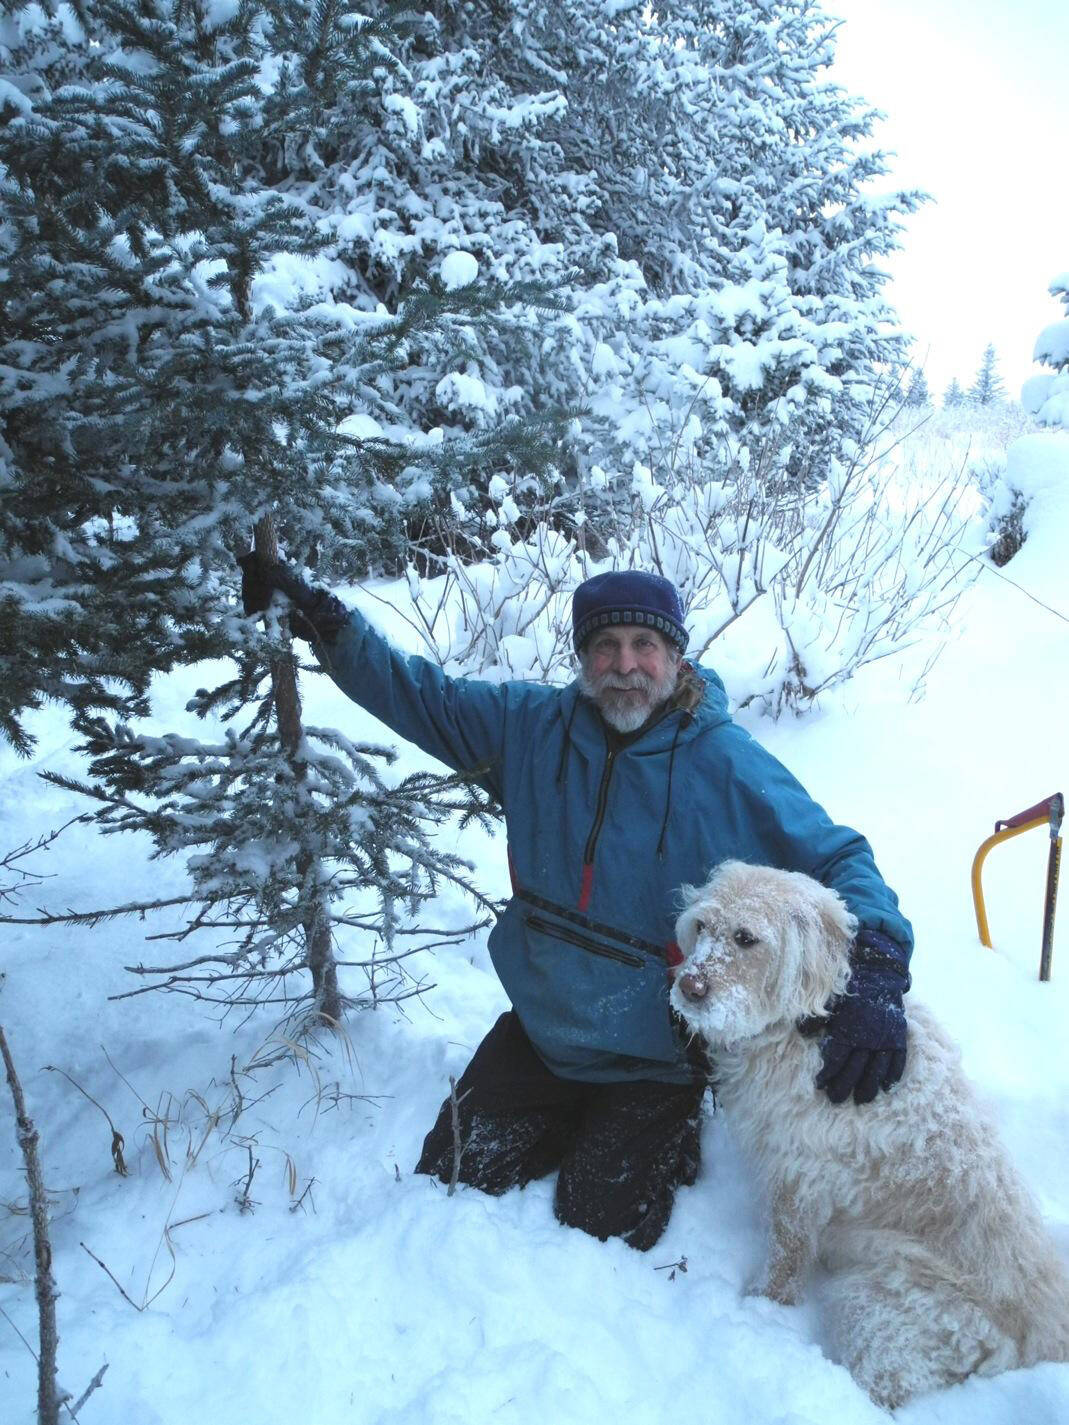 Michael Armstrong and his dog Leia harvest a Christmas tree in December 2013 on his land on Diamond Ridge near Homer, Alaska. (Photo by Jenny Stroyeck)